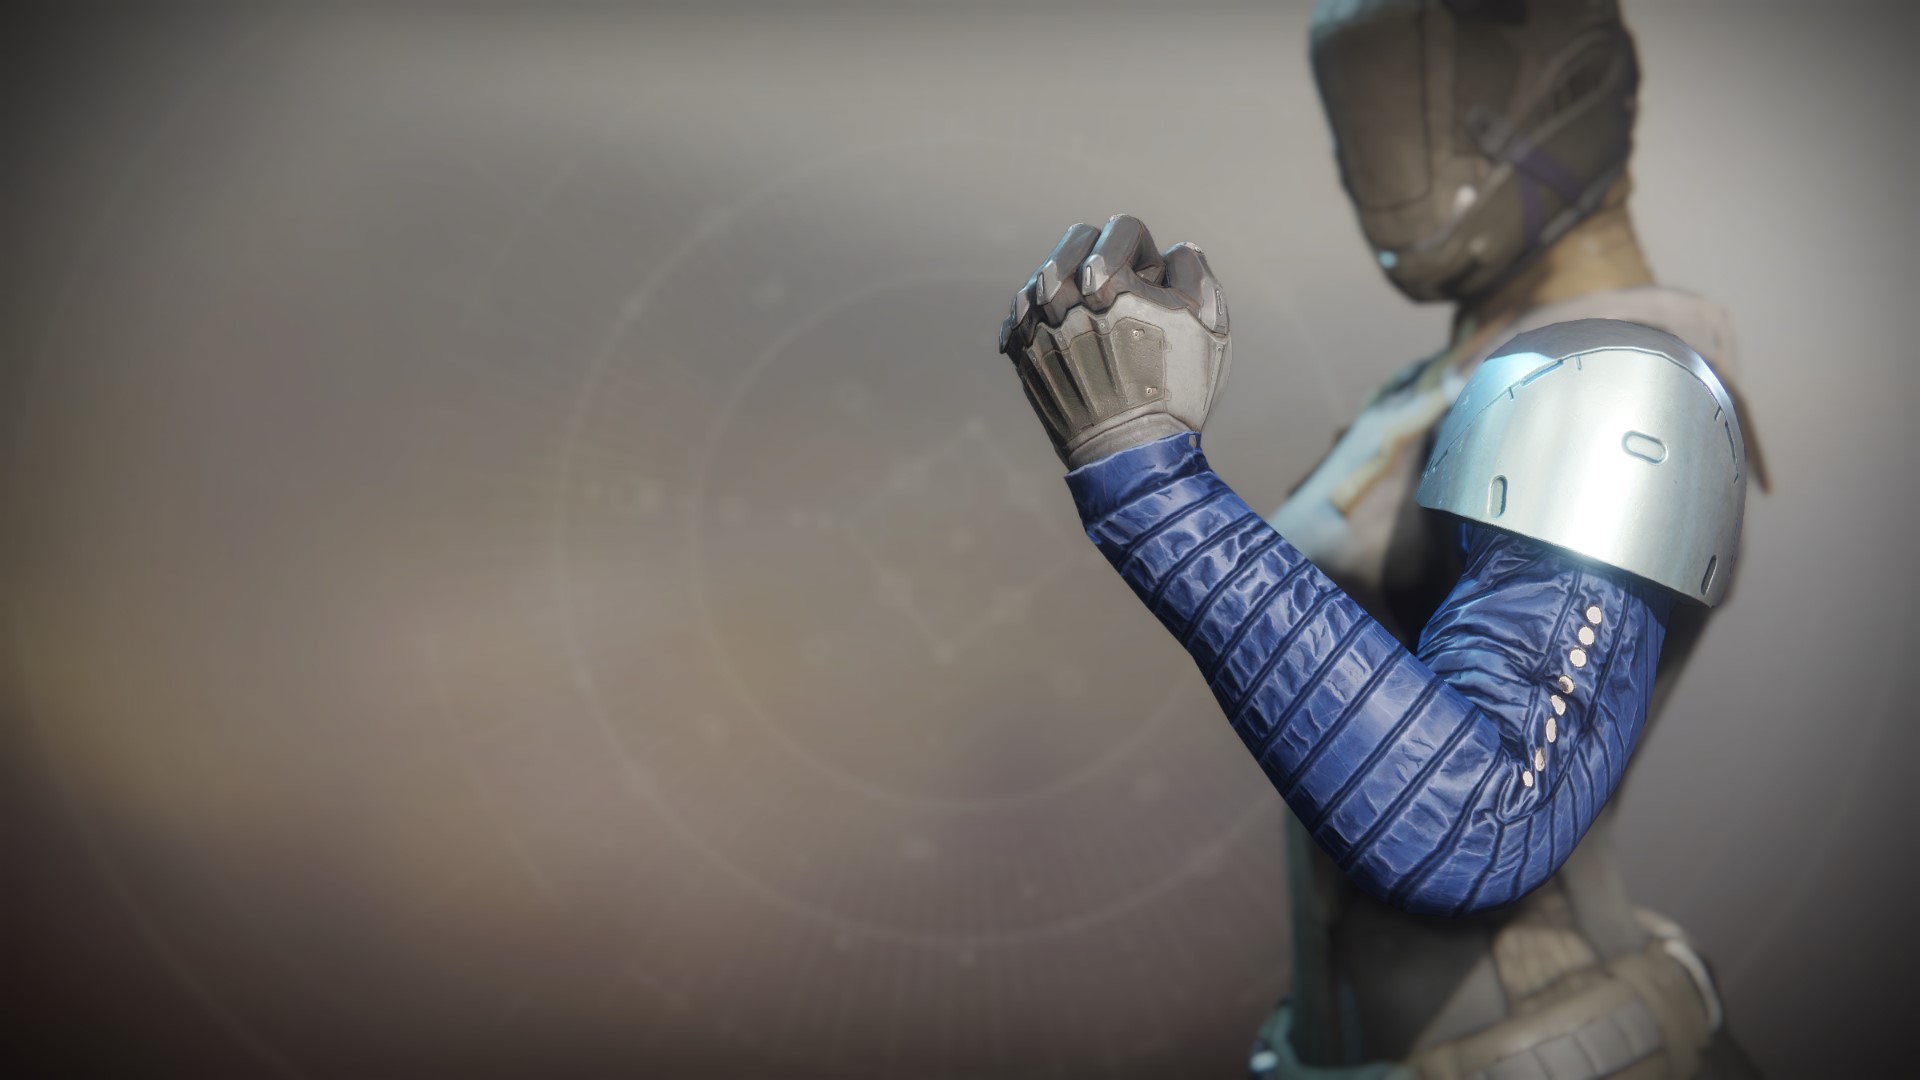 An in-game render of the Righteous Gauntlets.